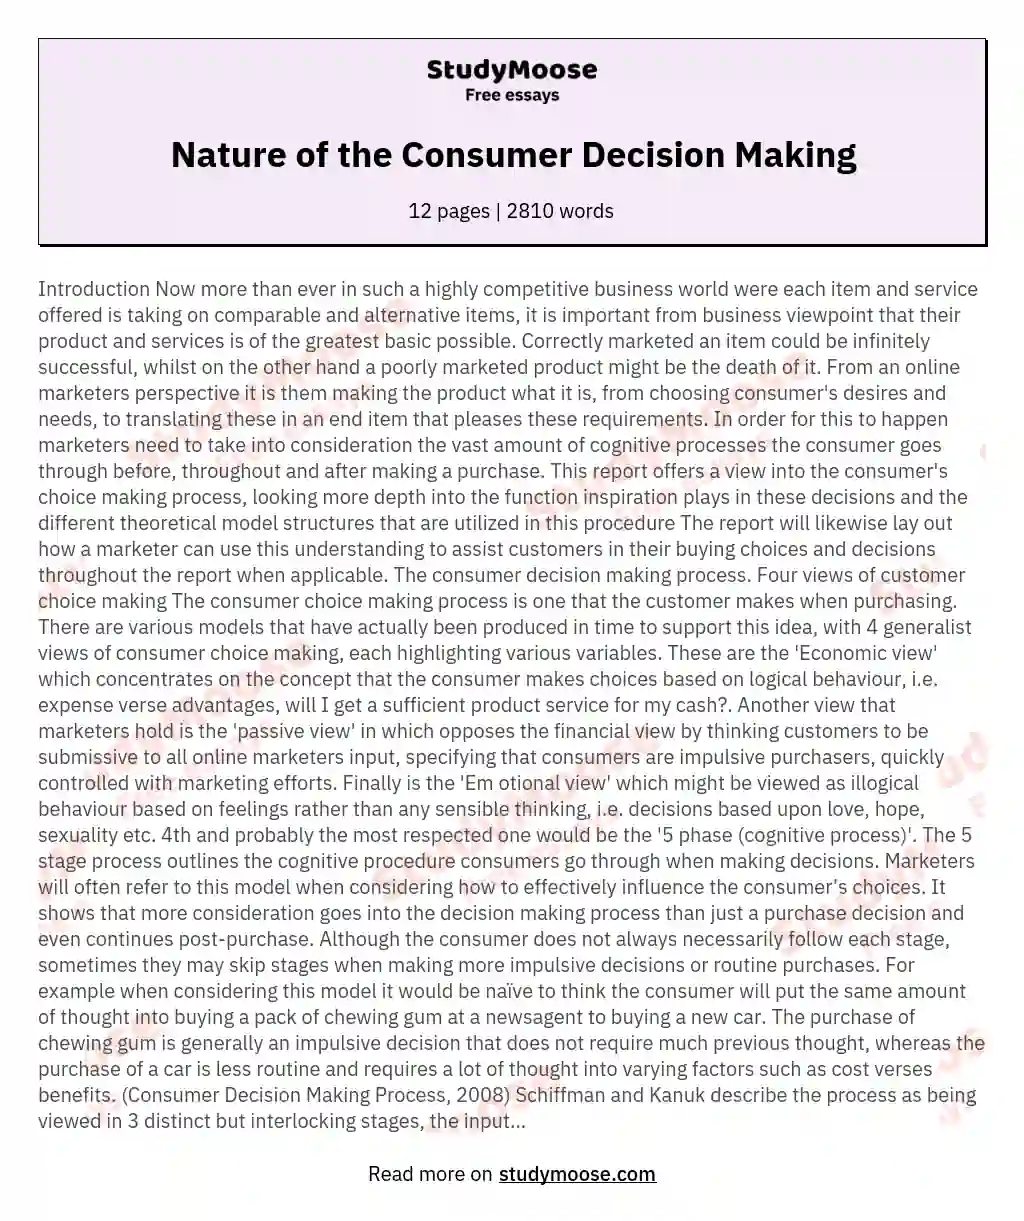 Nature of the Consumer Decision Making